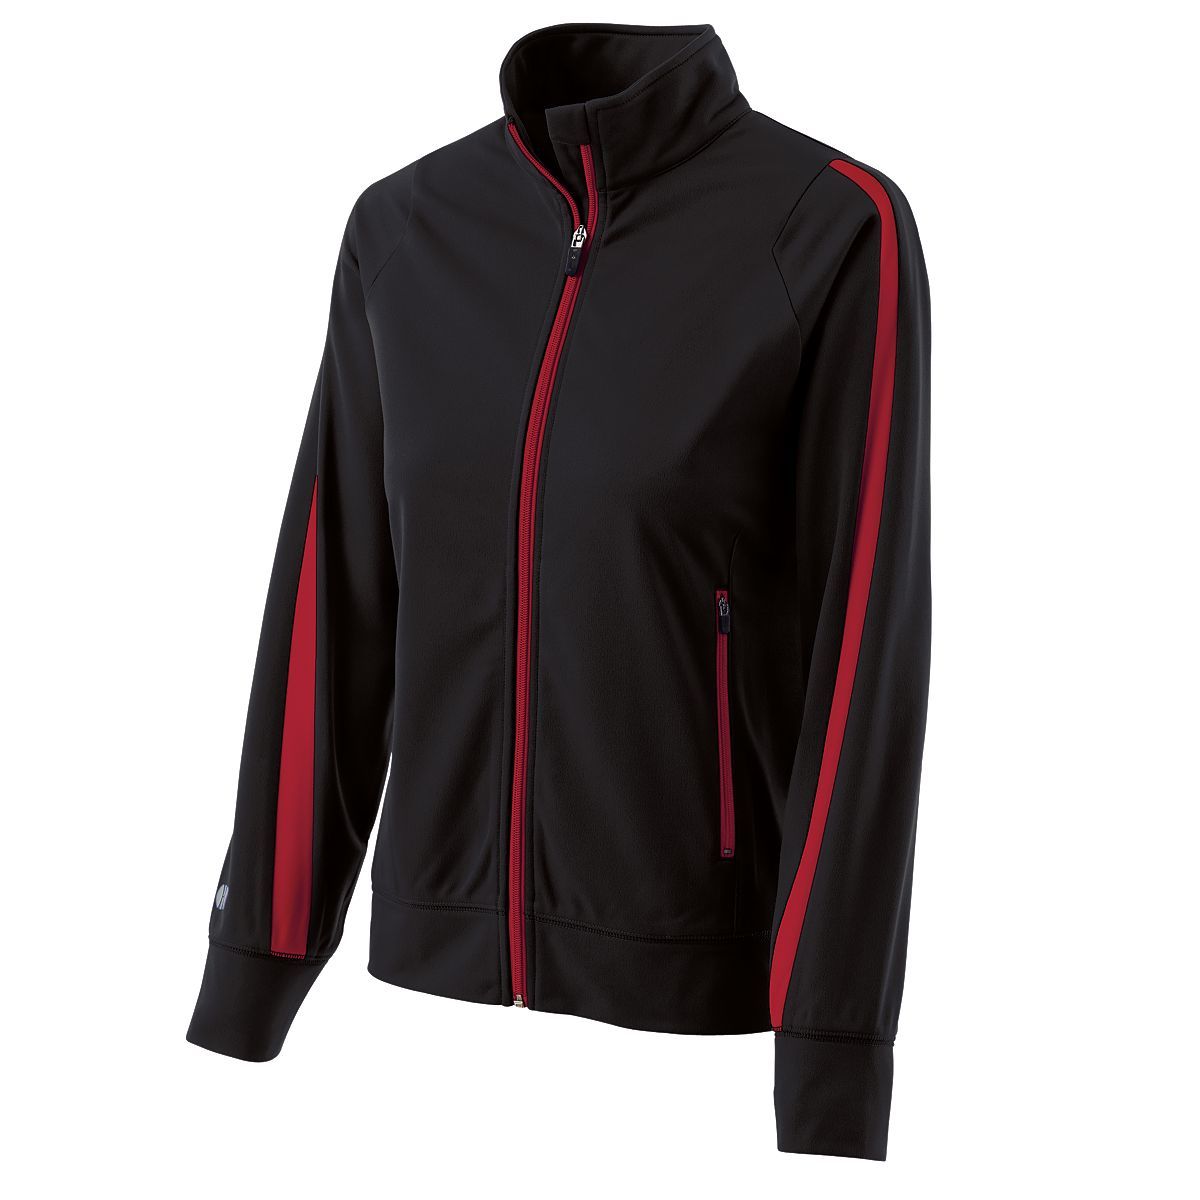 Holloway Ladies Determination Jacket in Black/Scarlet  -Part of the Ladies, Ladies-Jacket, Holloway, Outerwear product lines at KanaleyCreations.com